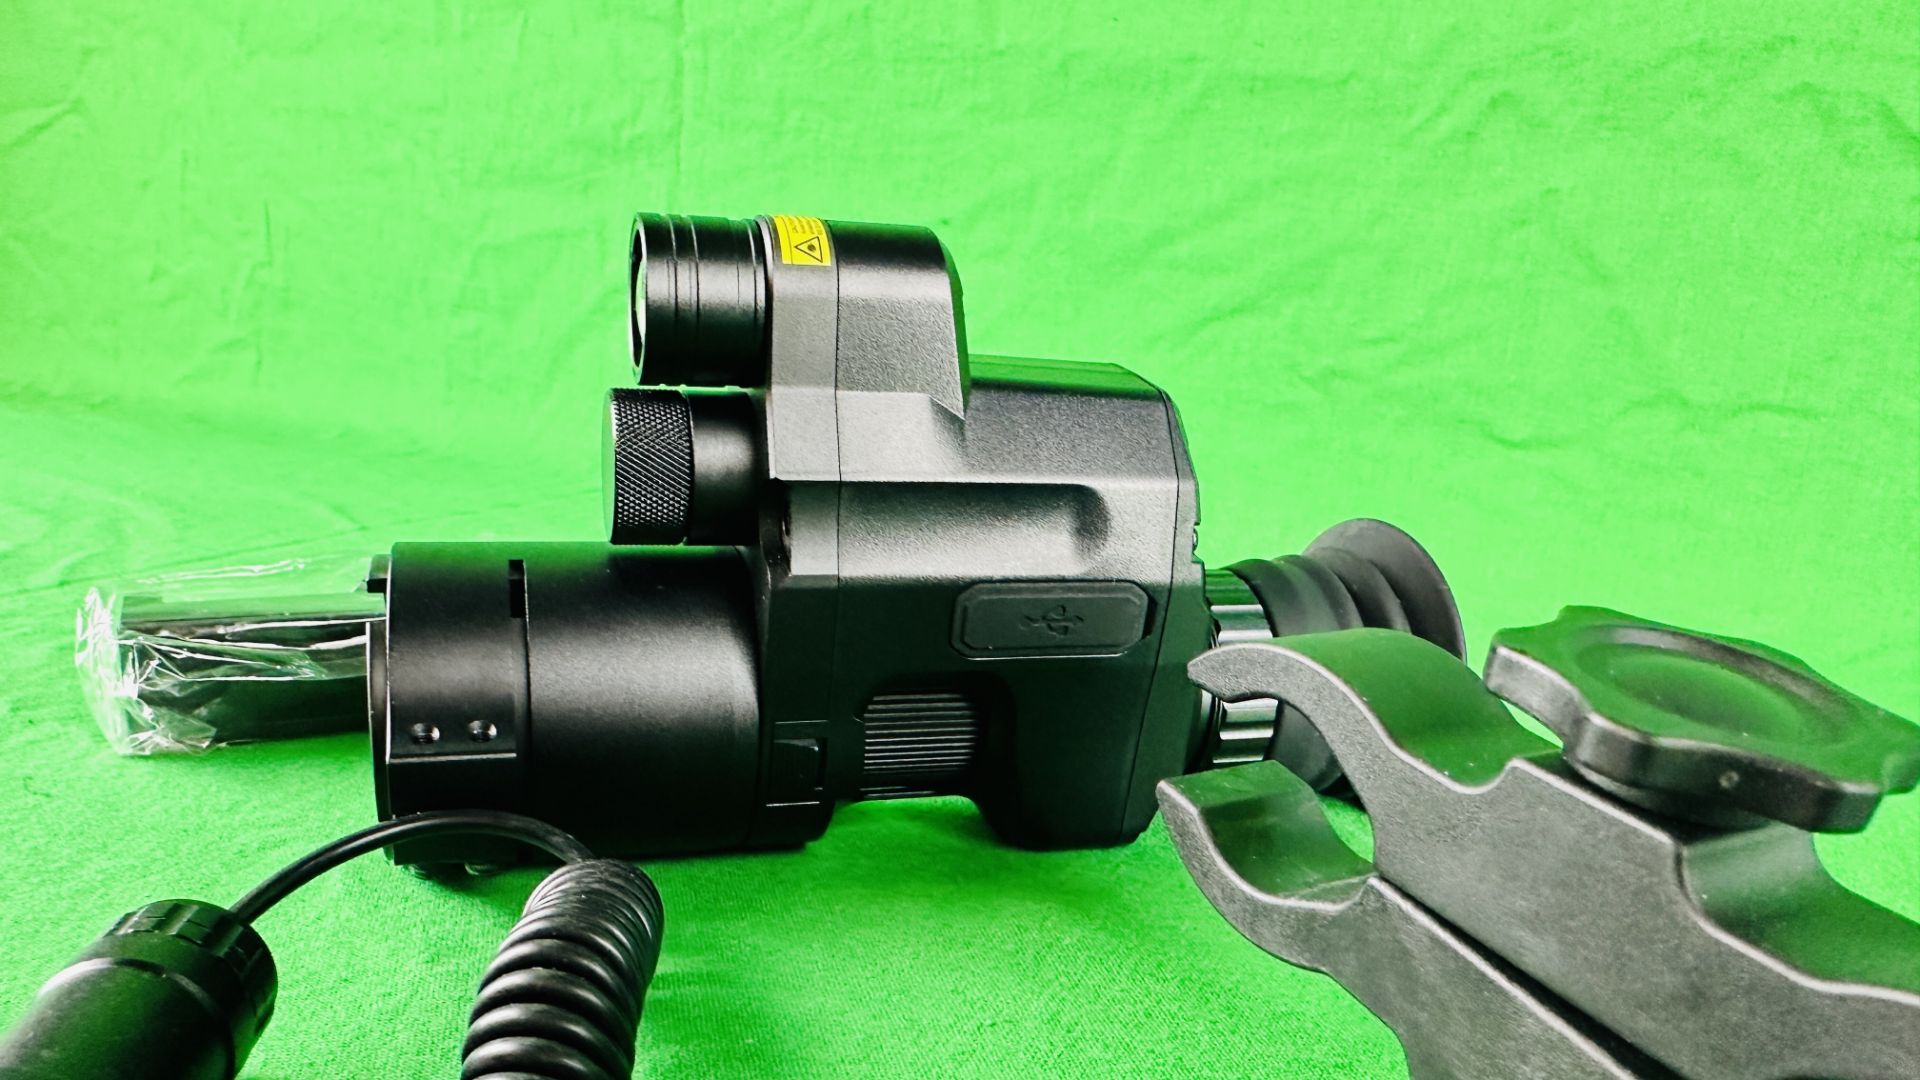 PARD DIGITAL NIGHT VISION SCOPE MODEL NV007V COMPLETE WITH CHARGER PLUS WESLITE RED LIGHT TORCH. - Image 4 of 13